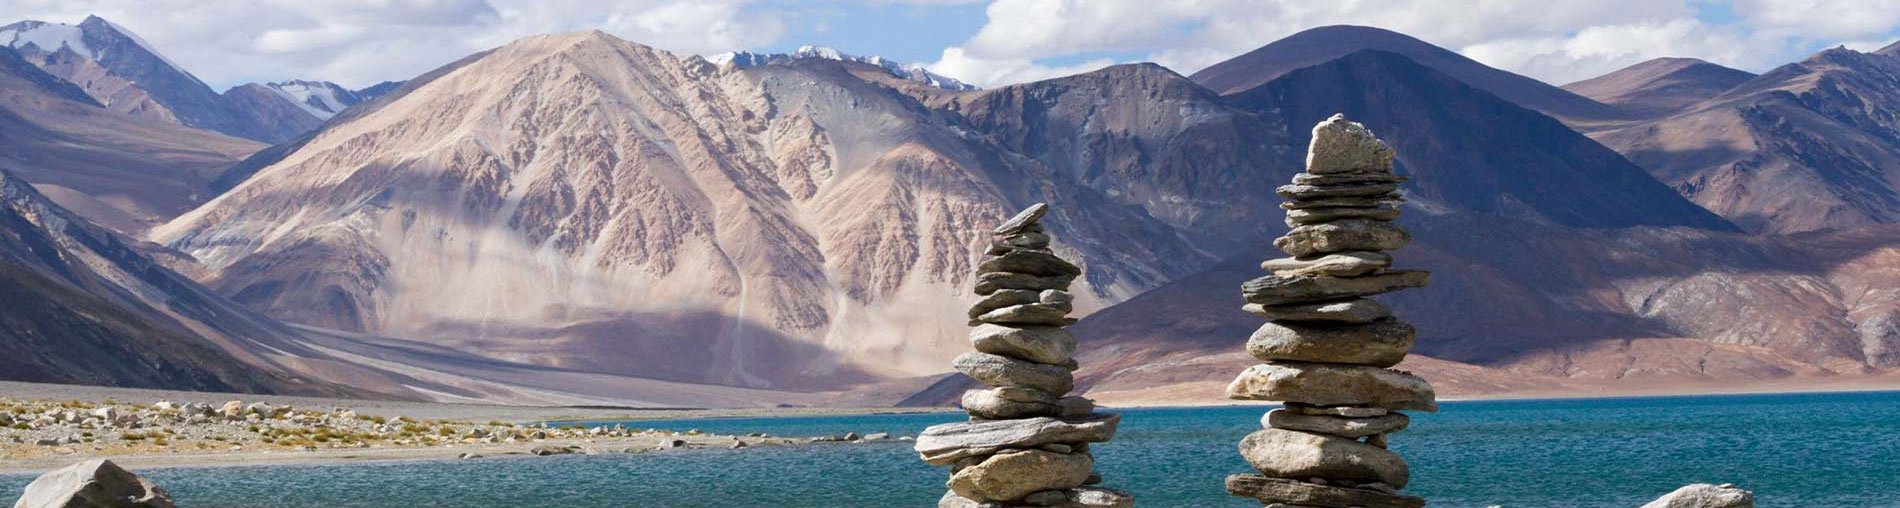 Leh Ladakh Tour Package From India